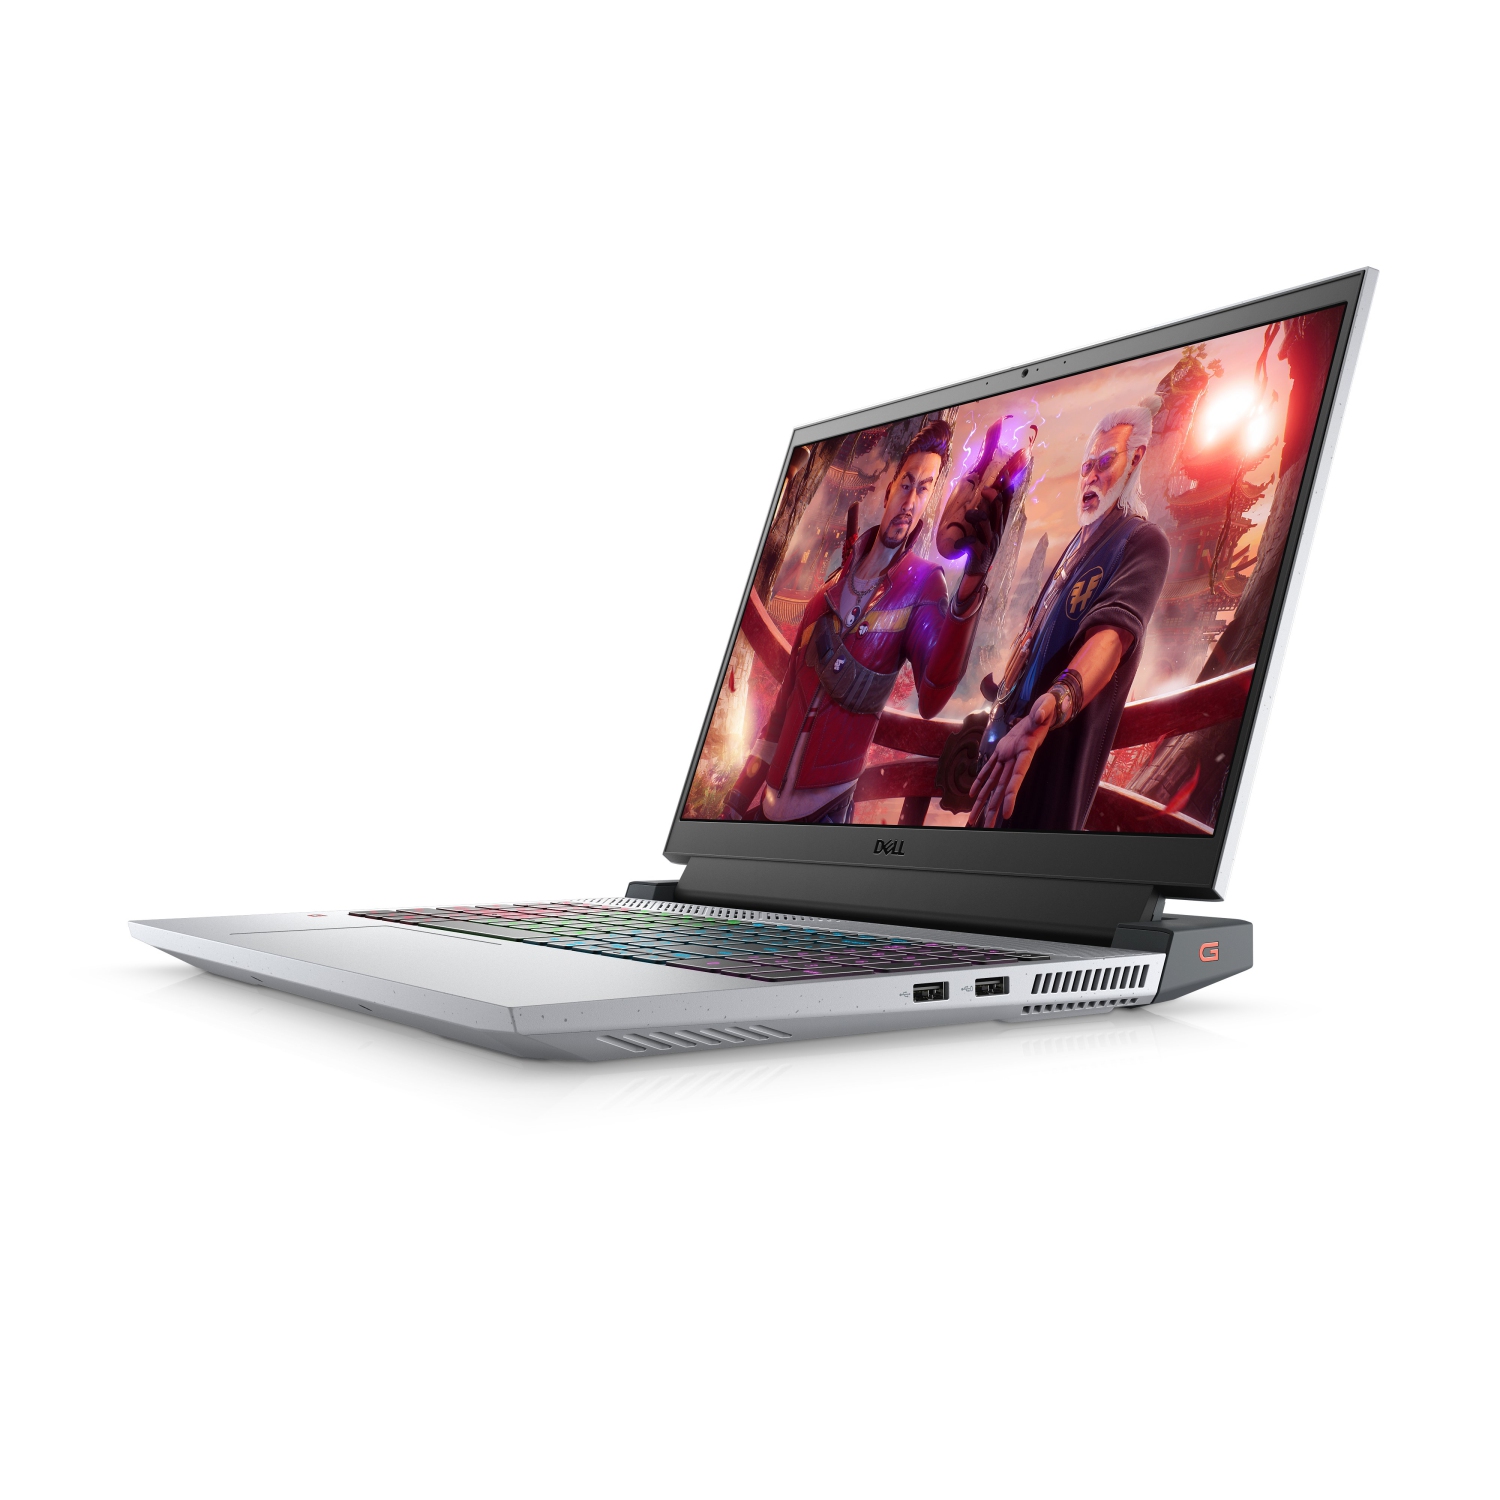 Refurbished (Excellent) - Dell G15 5515 Gaming Laptop (2021) | 15.6" FHD | Core Ryzen 7 - 512GB SSD - 16GB RAM - 3050 Ti | 8 Cores @ 4.6 GHz Certified Refurbished